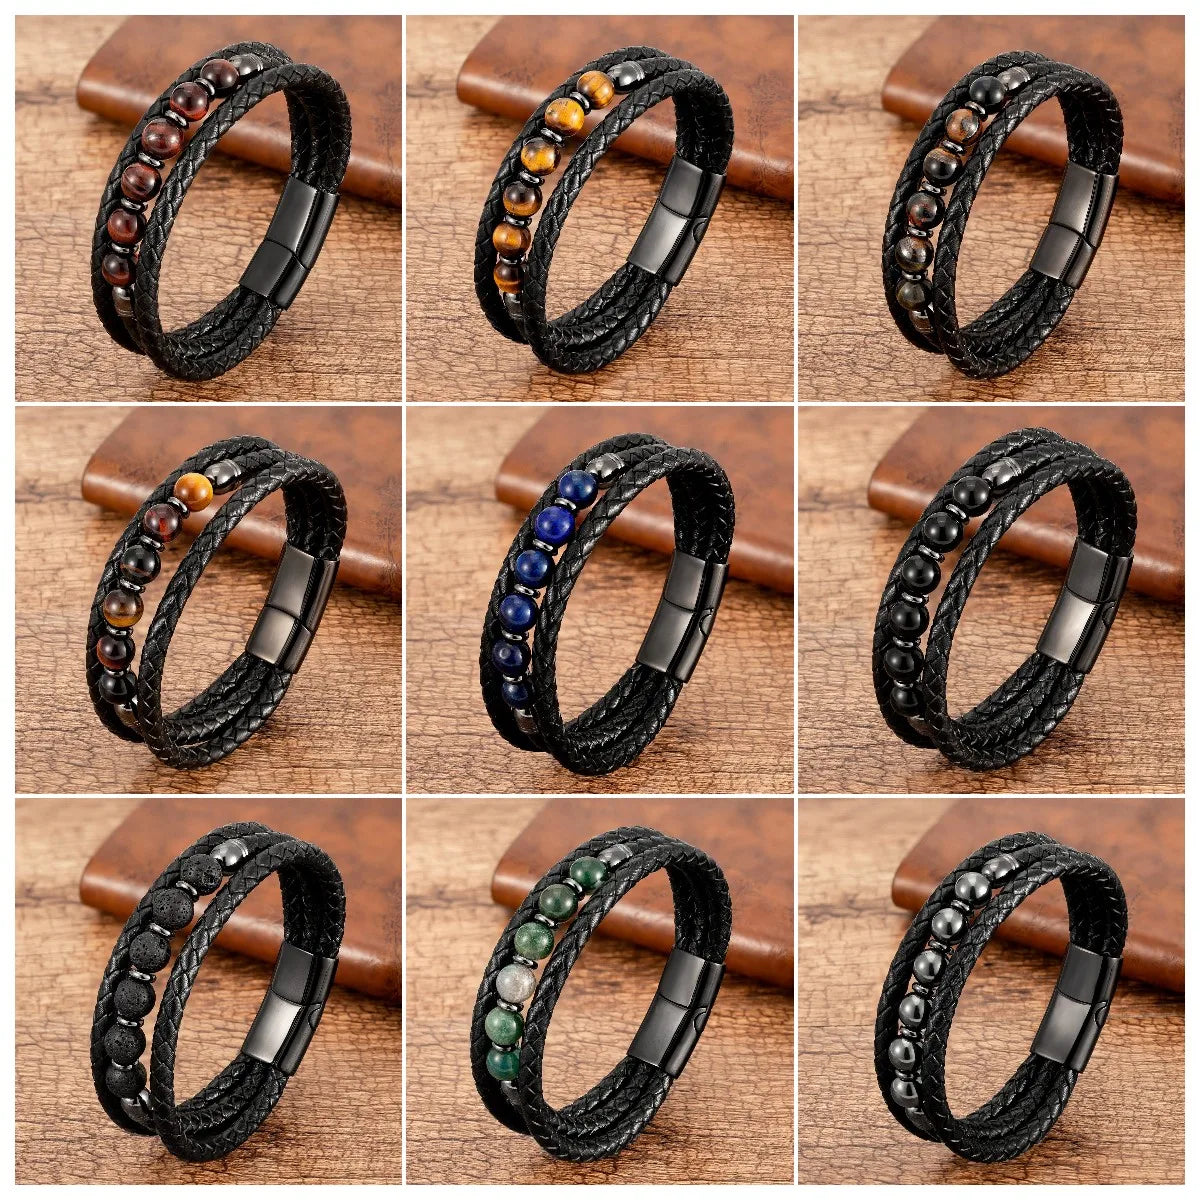 2021 Trendy Multilayer Leather Bracelets Men Jewelry 9 Style Round Stone 8mm Beaded Bracelets For Male Women Valentine Day Gifts